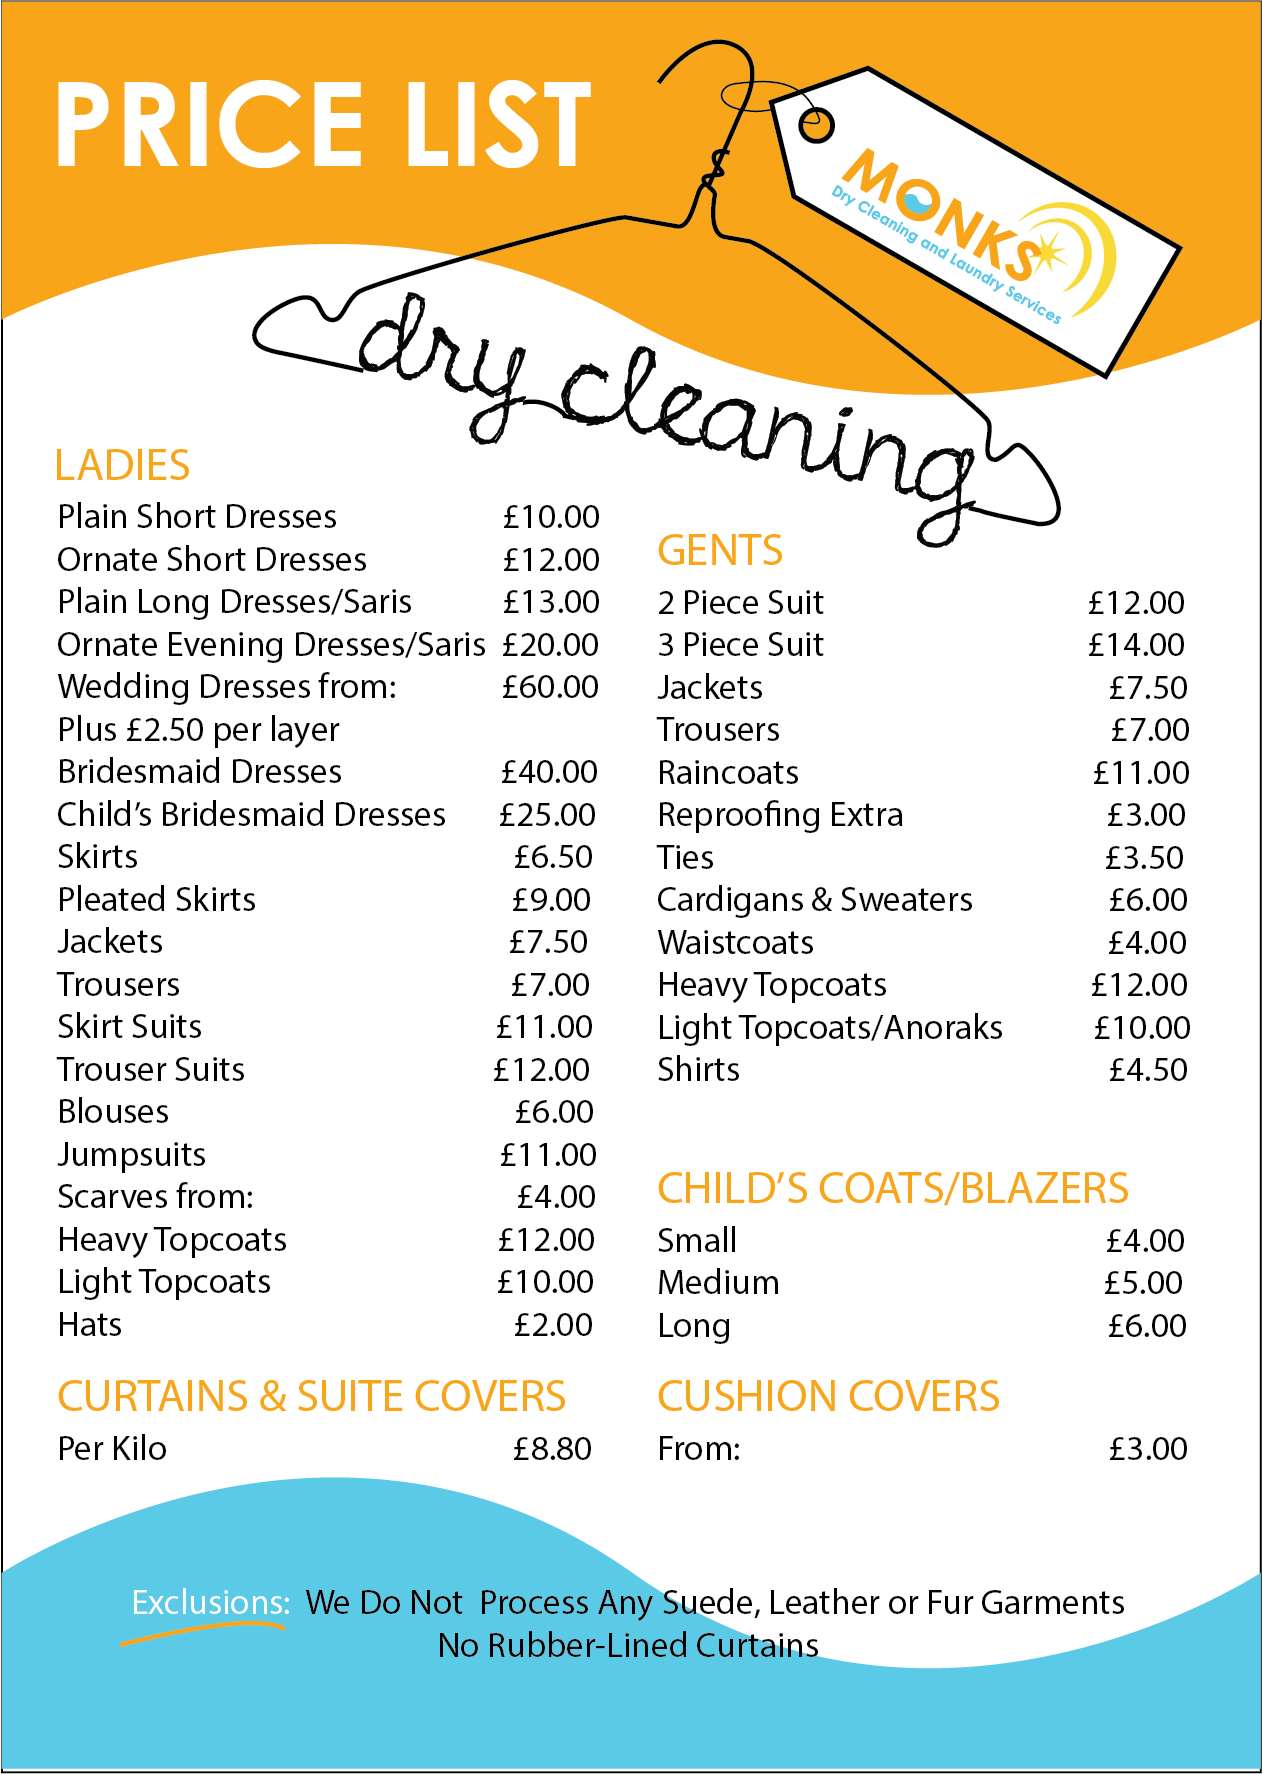 Dry Cleaning Price List How do you Price a Switches?